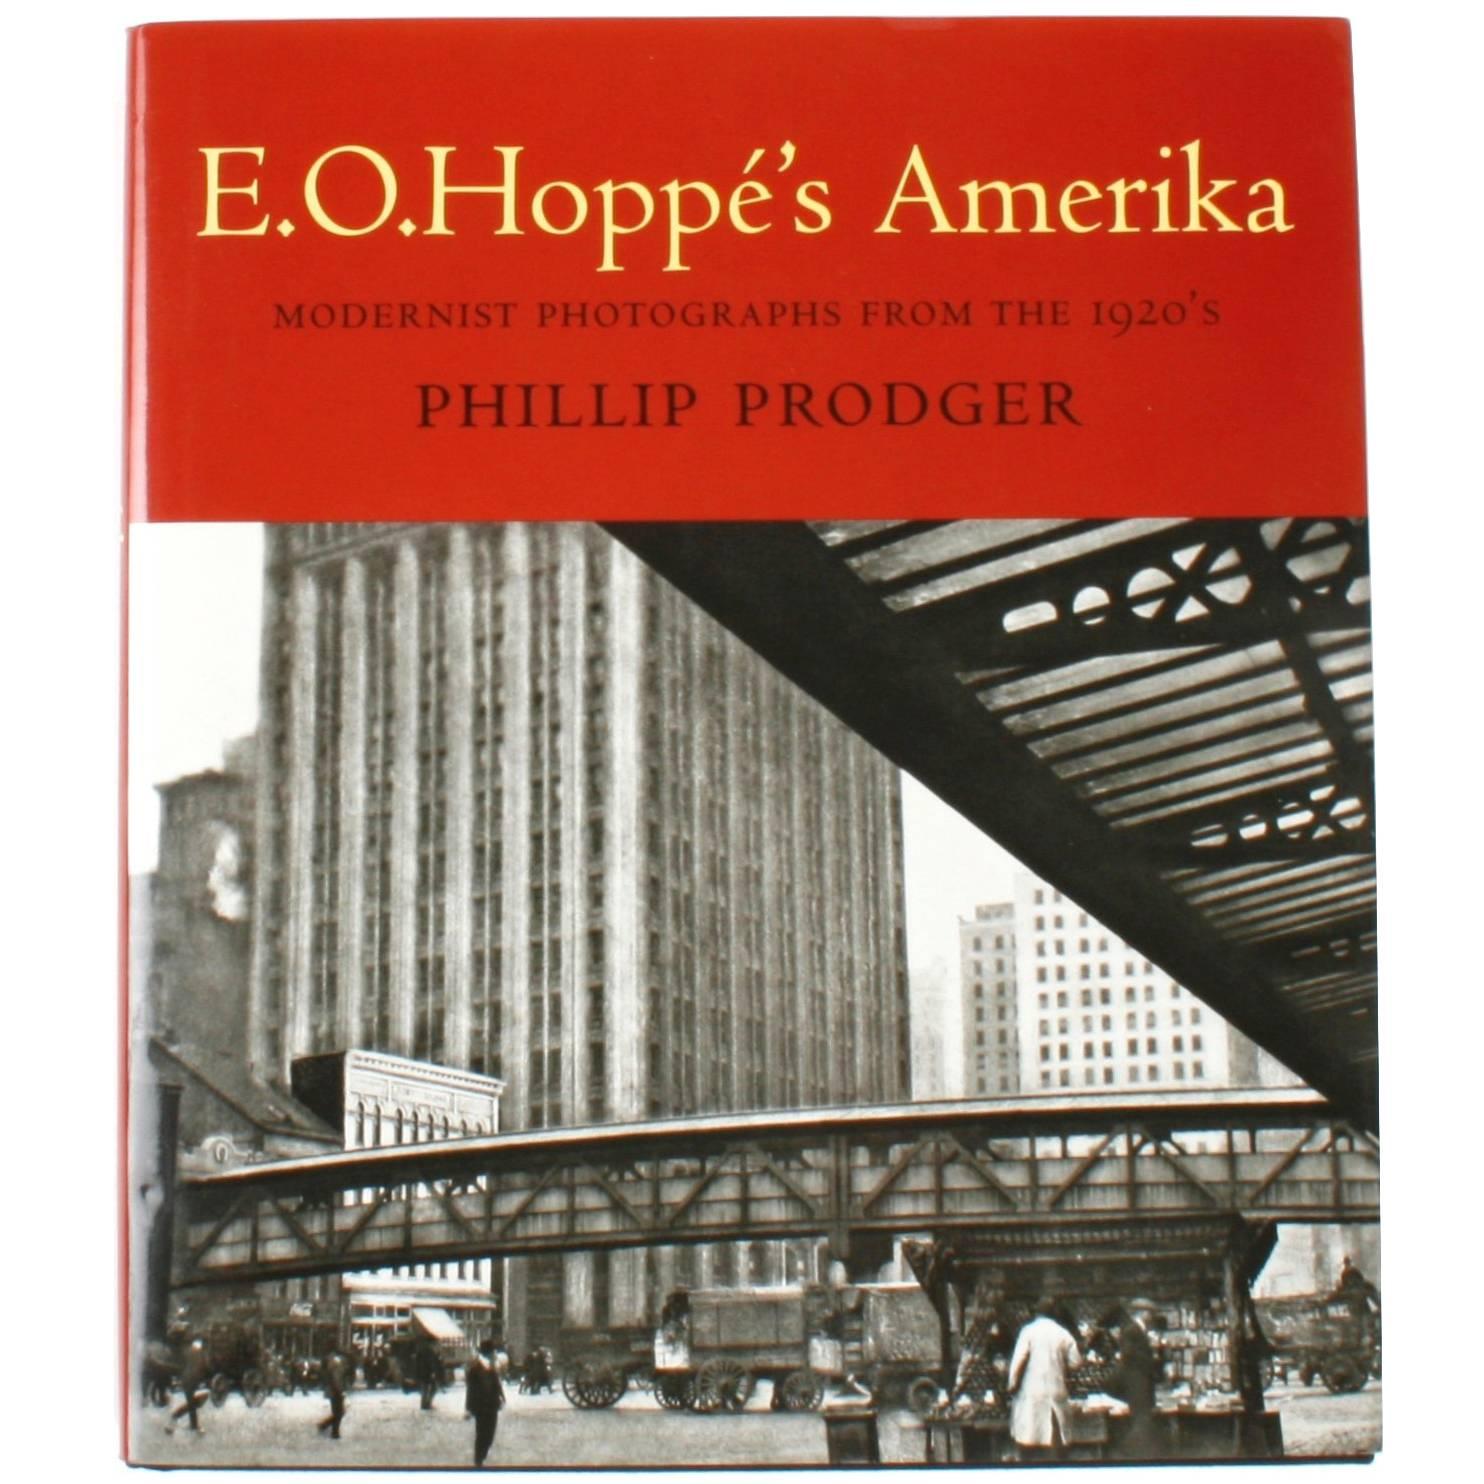 E. O. Hoppé's Amerika: Modernist Photographs from the 1920 First Edition For Sale